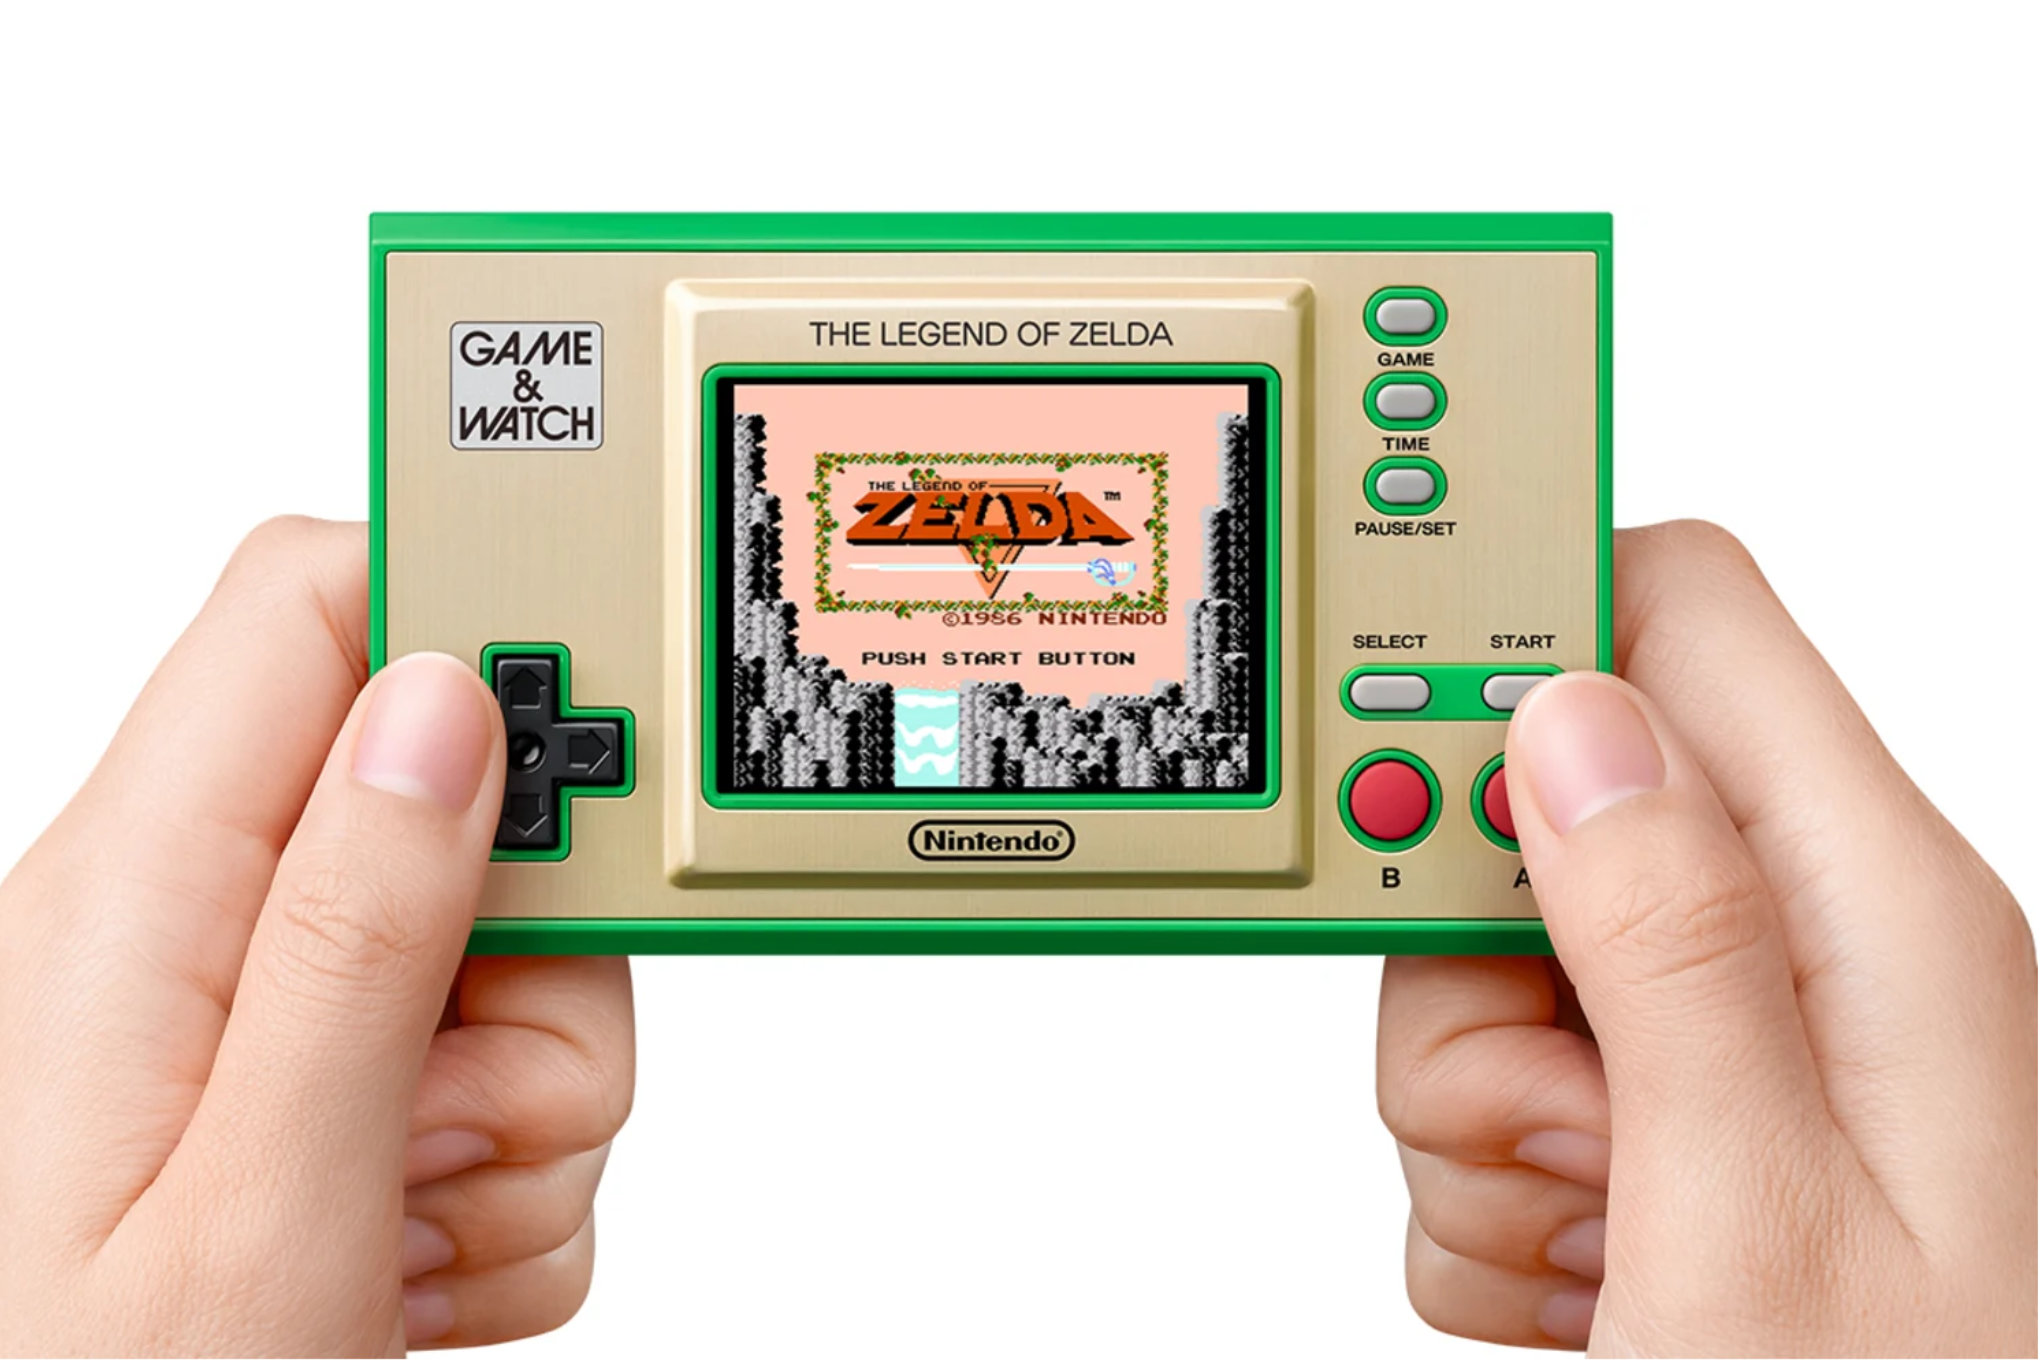 Two hands holding the Game &amp; Watch: The Legend of Zelda handheld. The Legend of Zelda game, originally released for the NES, is being displayed on its backlit color screen.